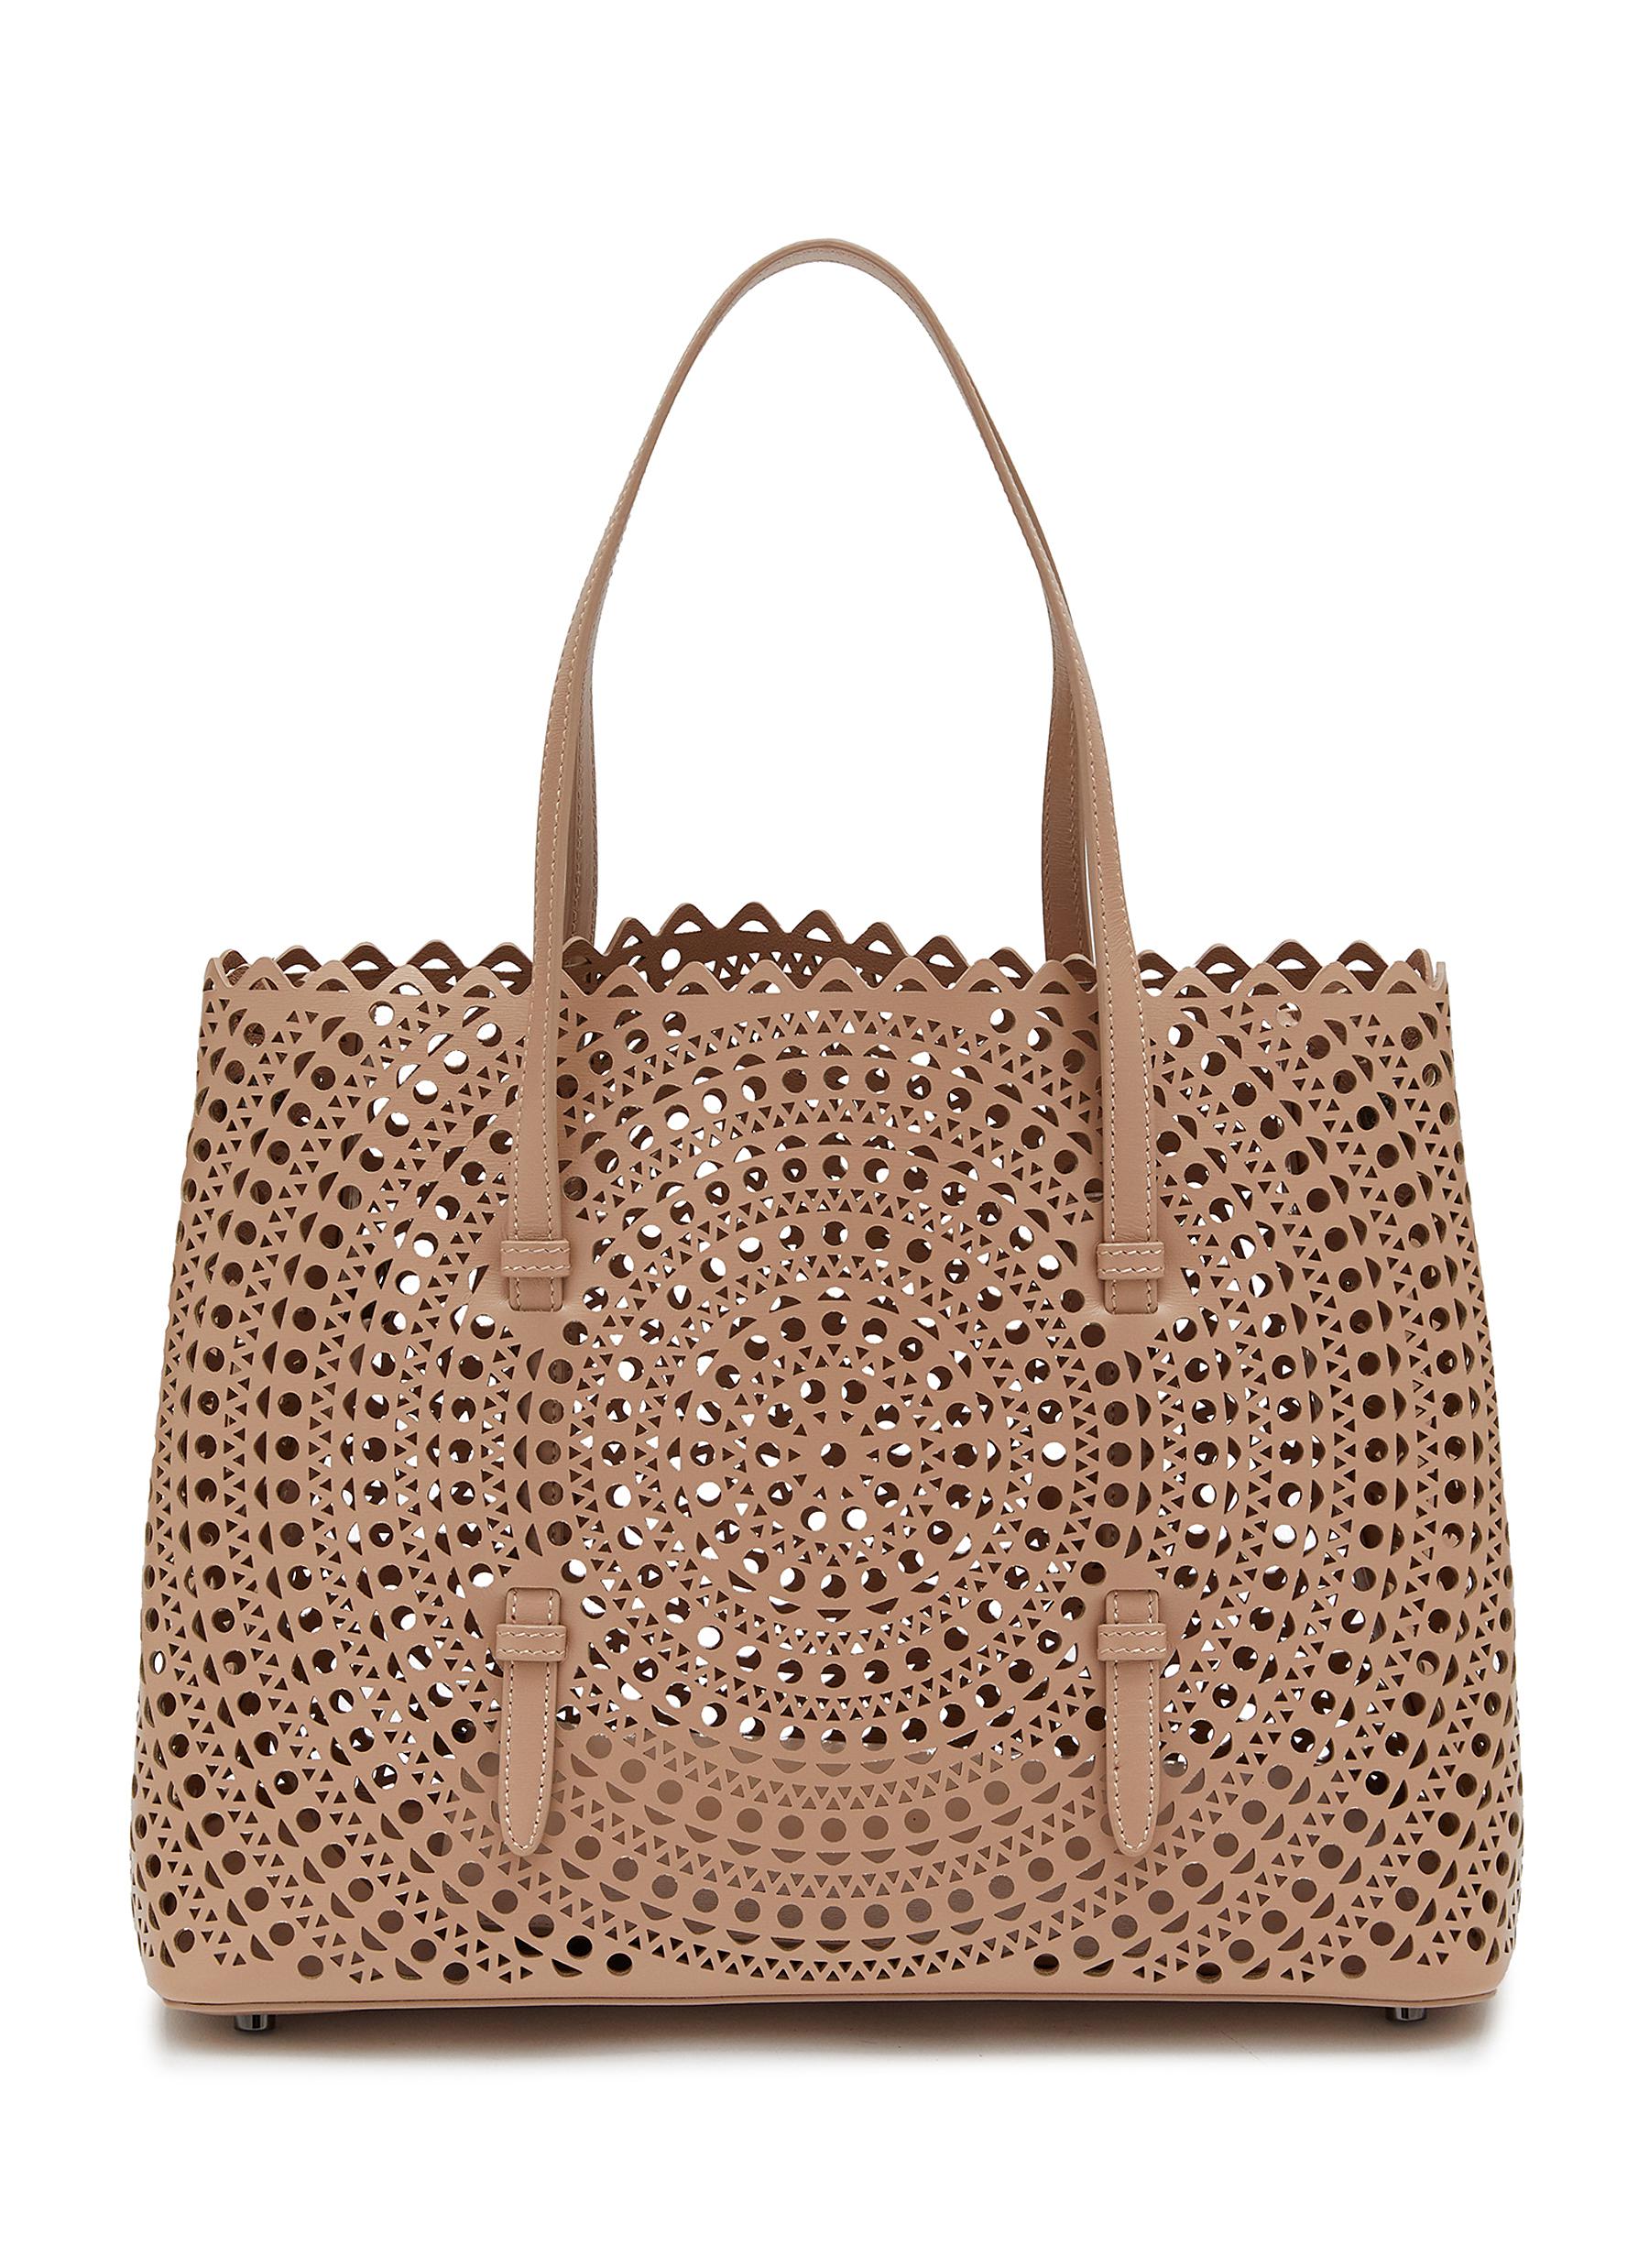 Mina 32 Perforated Leather Tote Bag